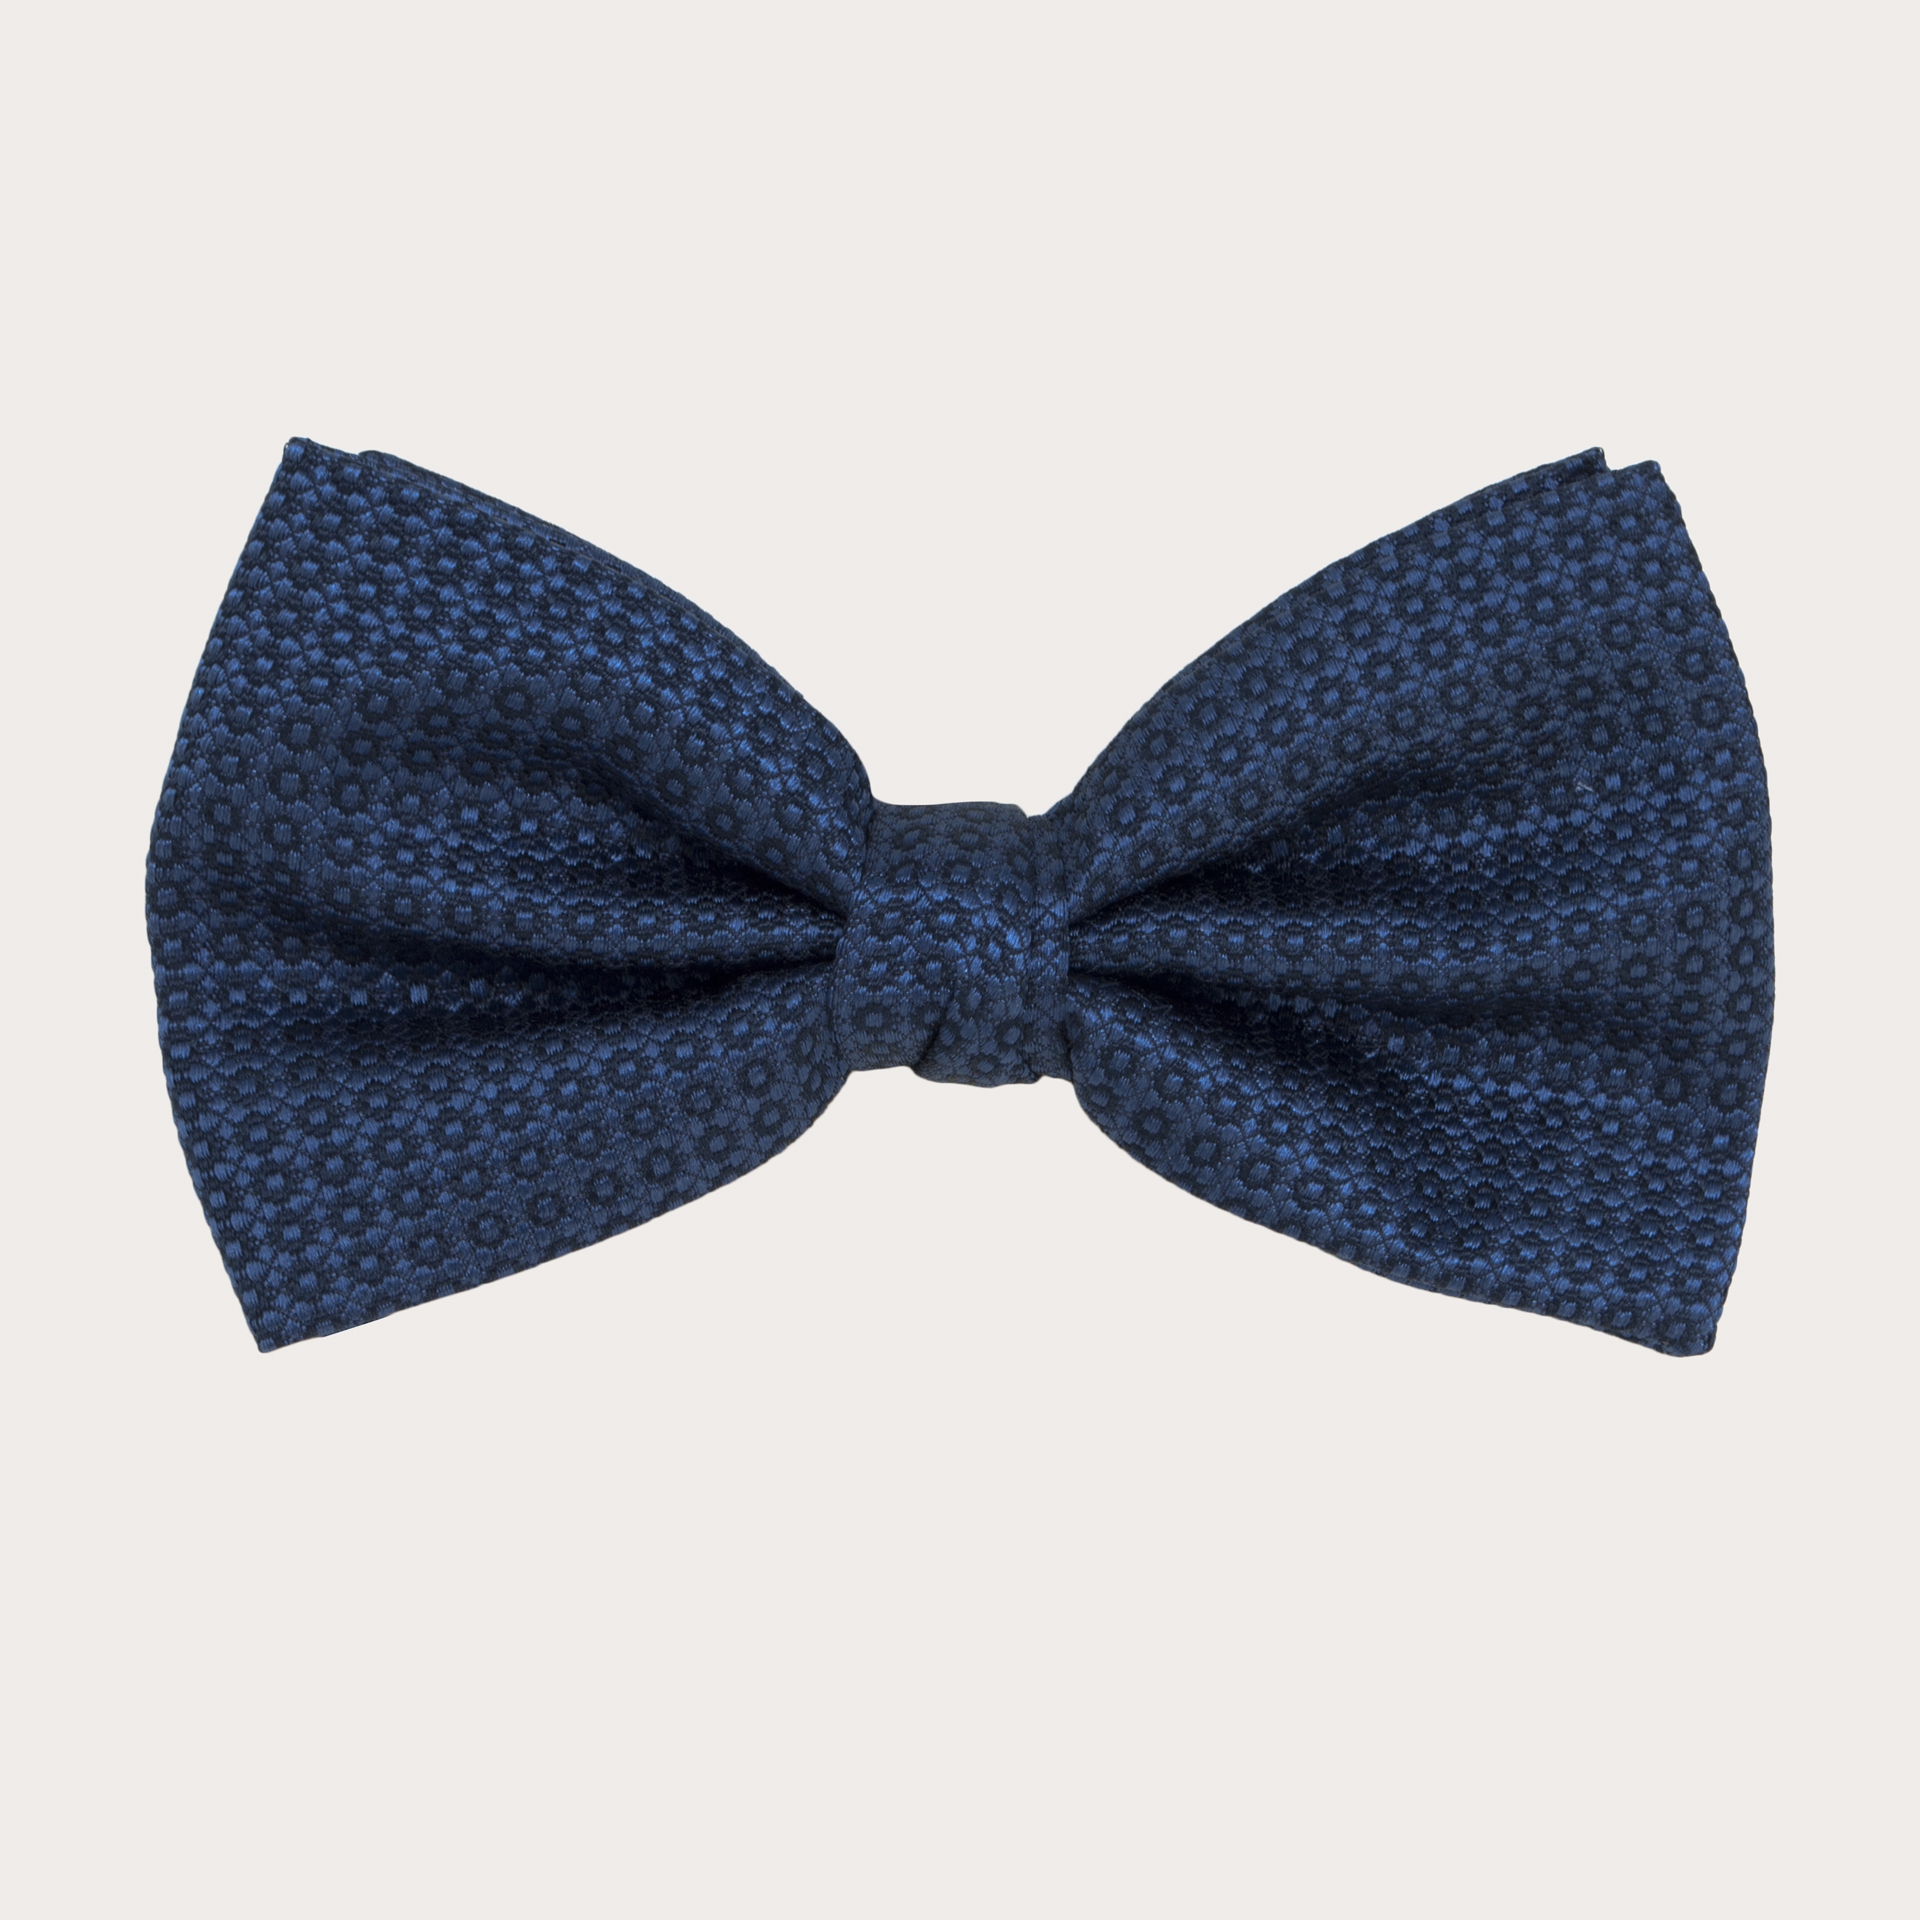 BRUCLE Navy blue jacquard silk bow tie with tone-on-tone floral pattern